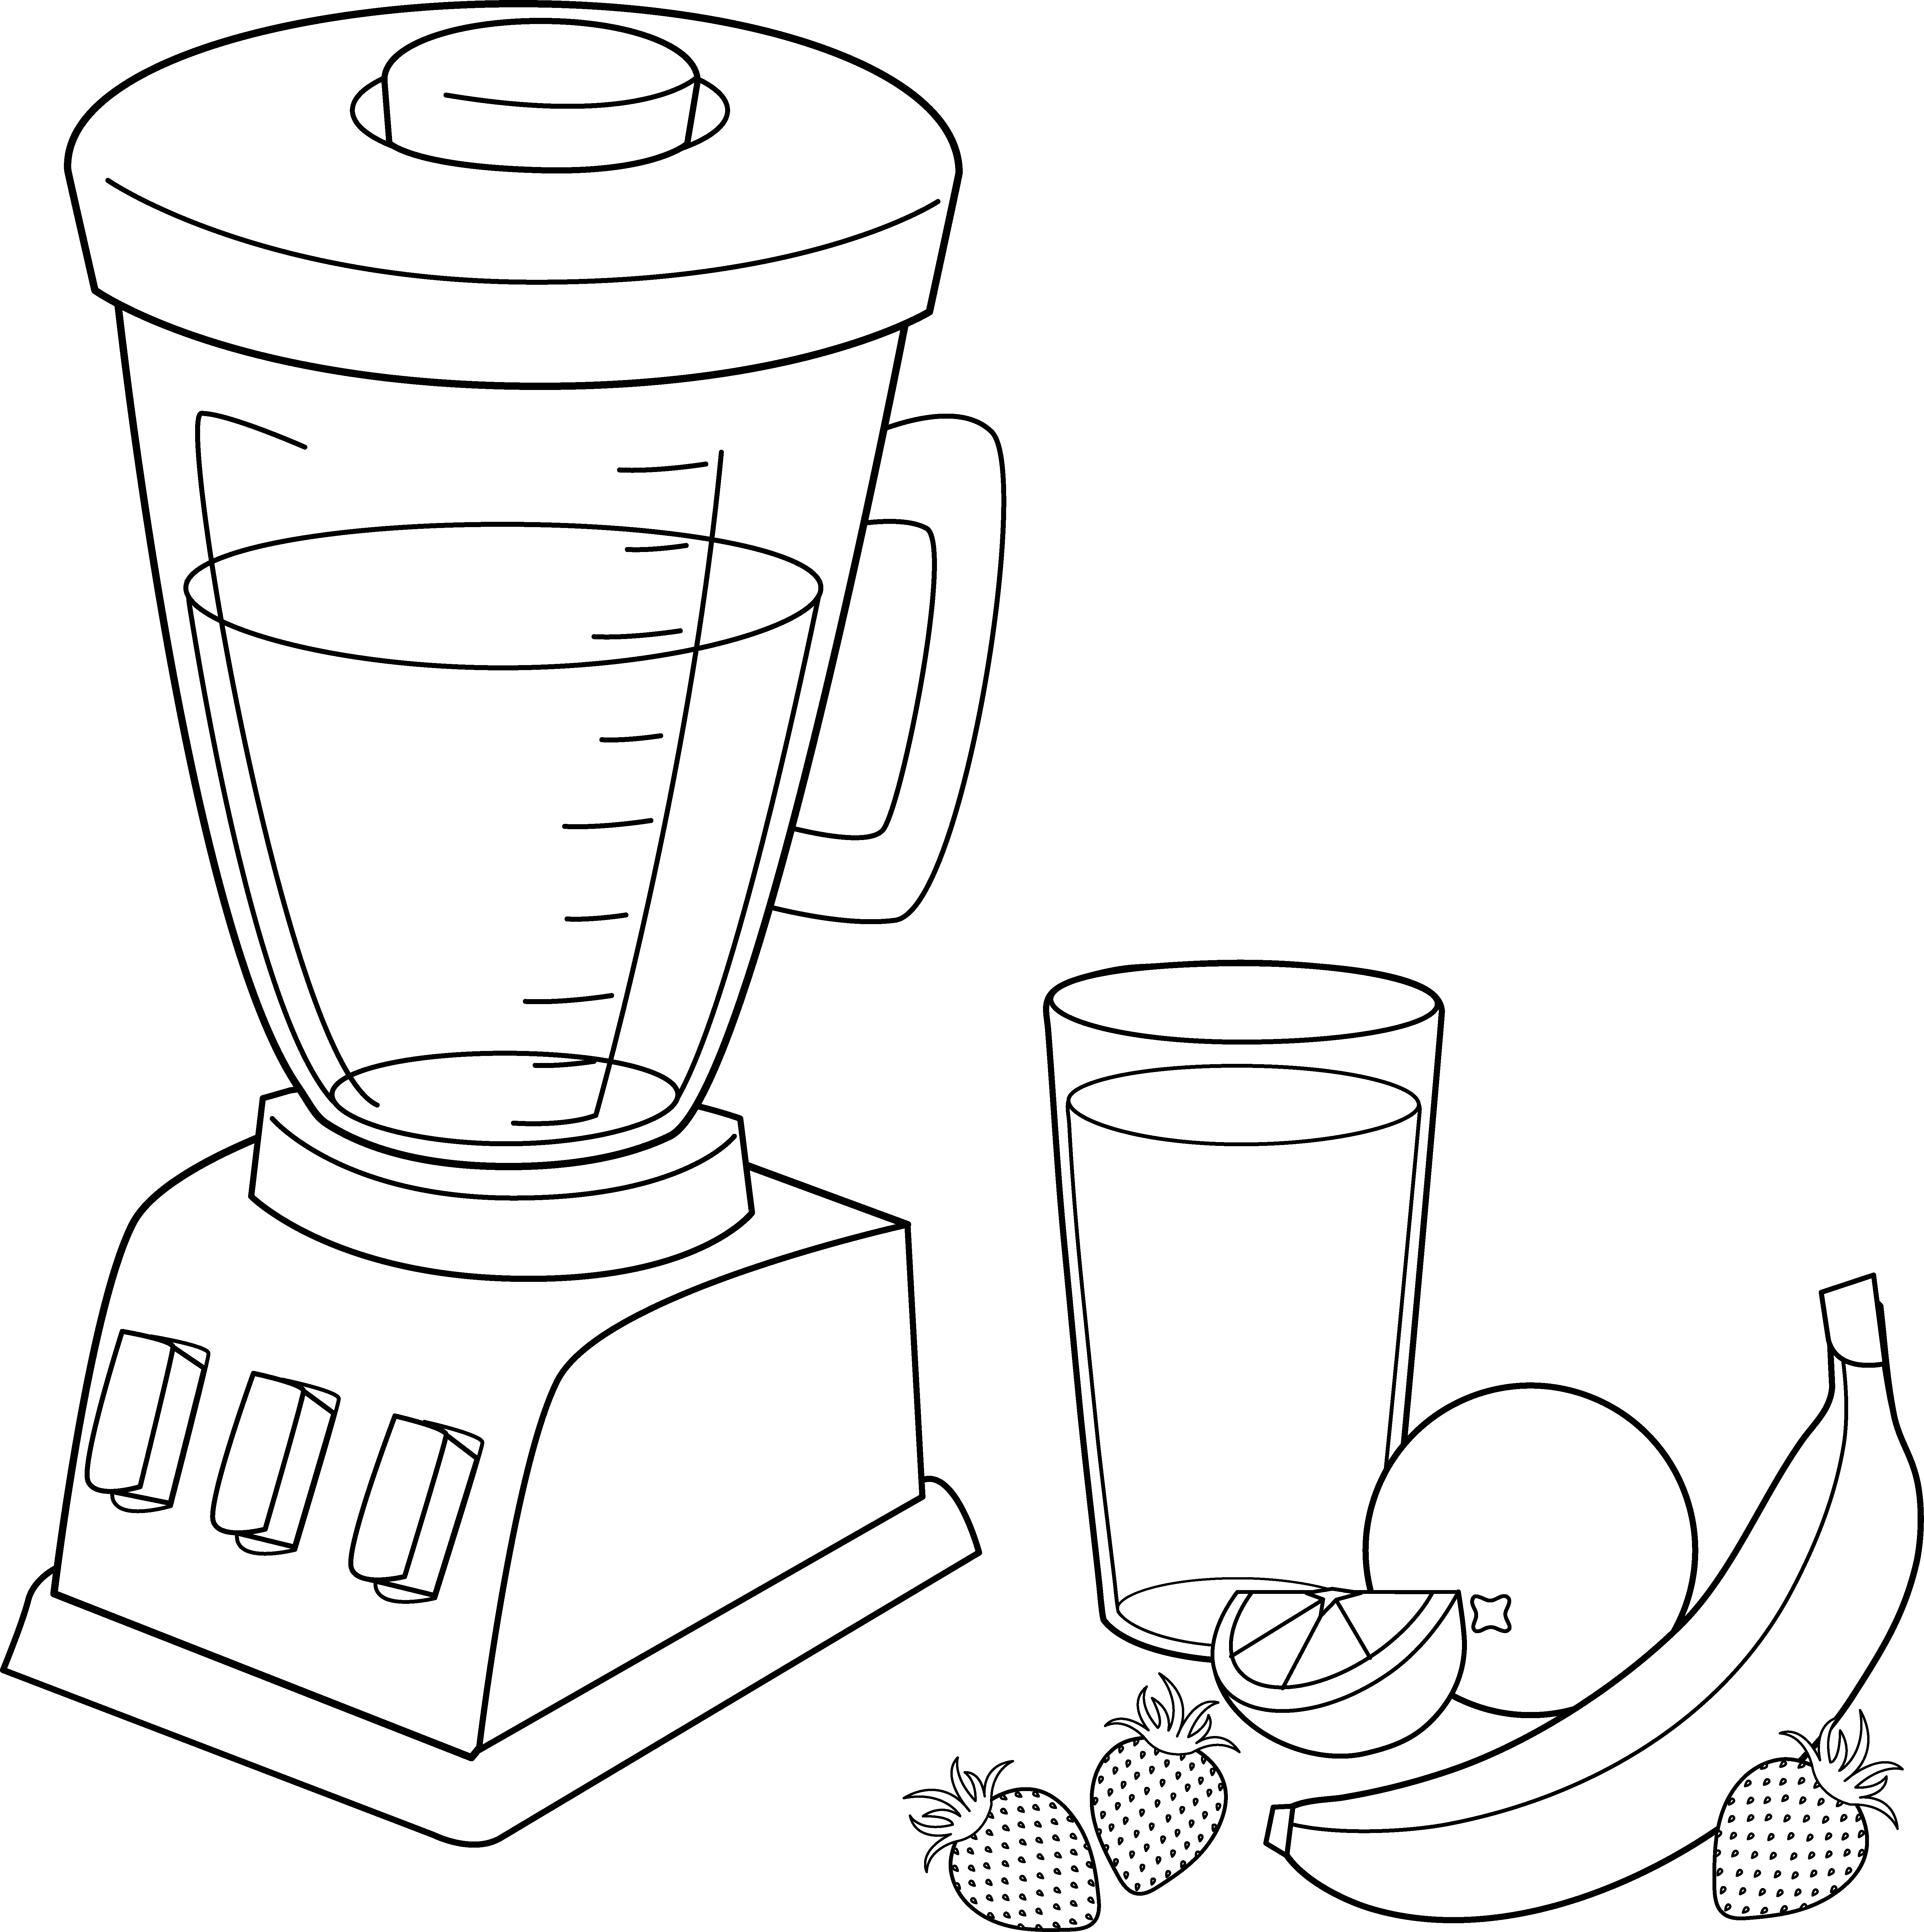 Smoothie clipart black and white